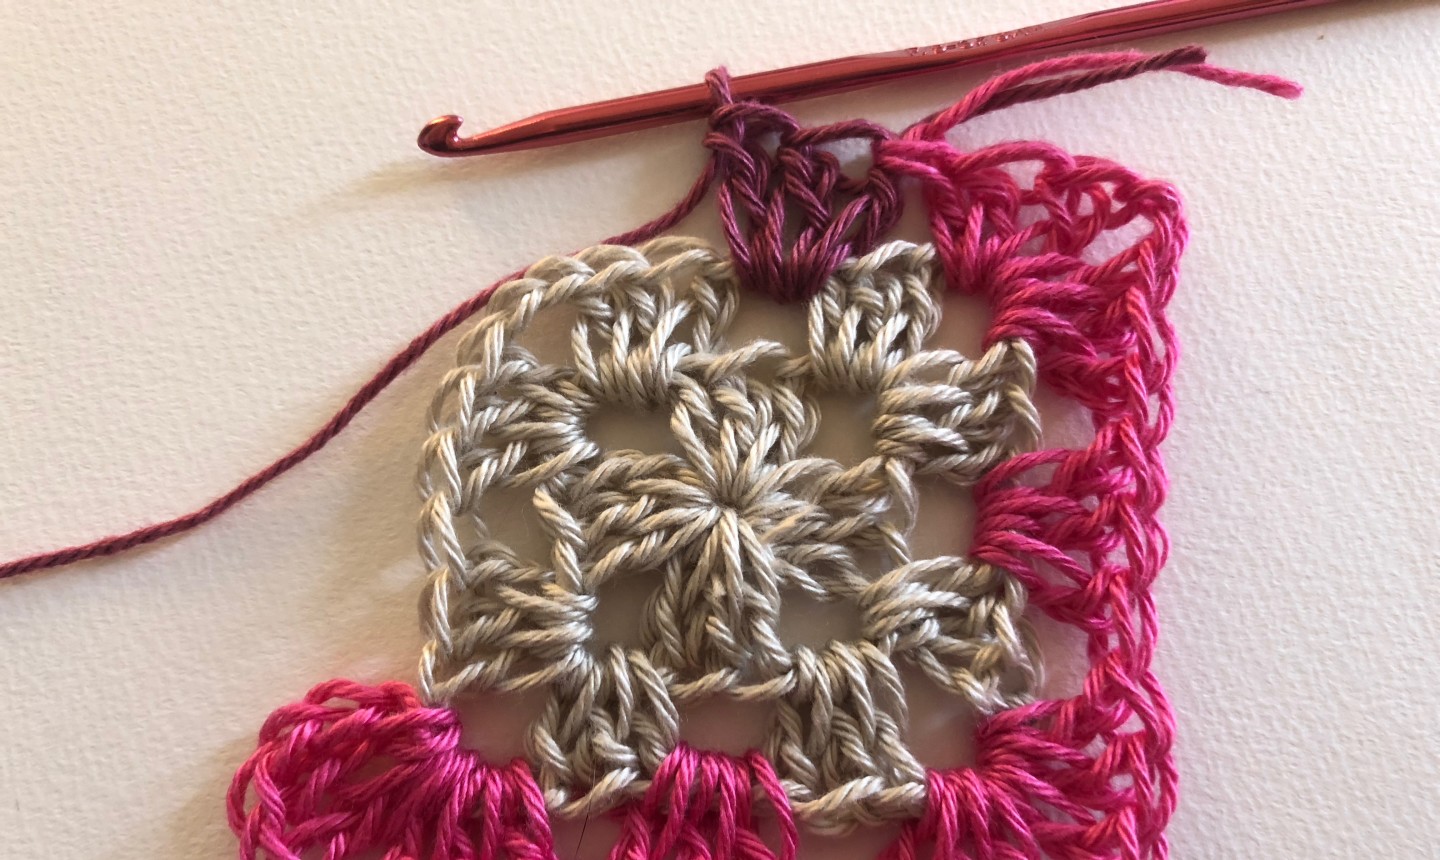 joining third granny square color